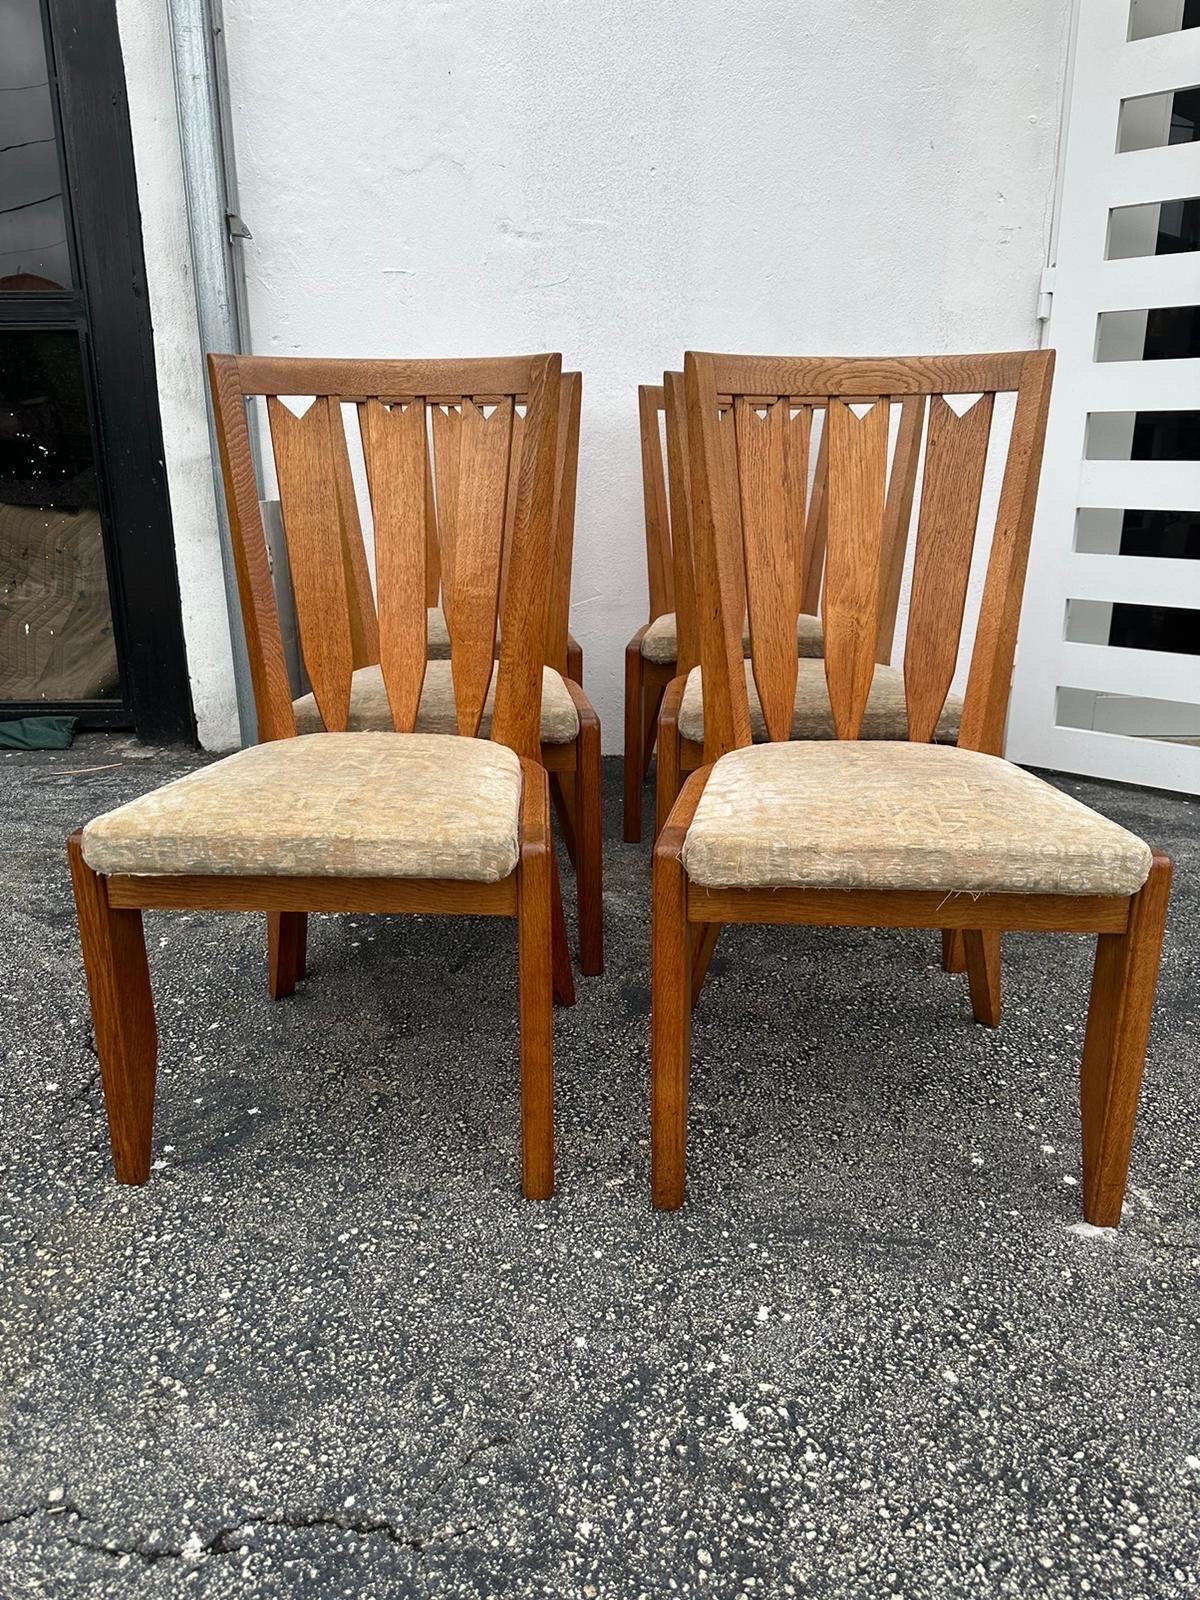 Vintage Oak dining chairs designed in 1965 by the world-famous French duo, Robert Guillerme and Jacques Chambron.  These dining chairs perfectly explain why, through proportions, unique concepts and the quality of woodworking at the highest level,